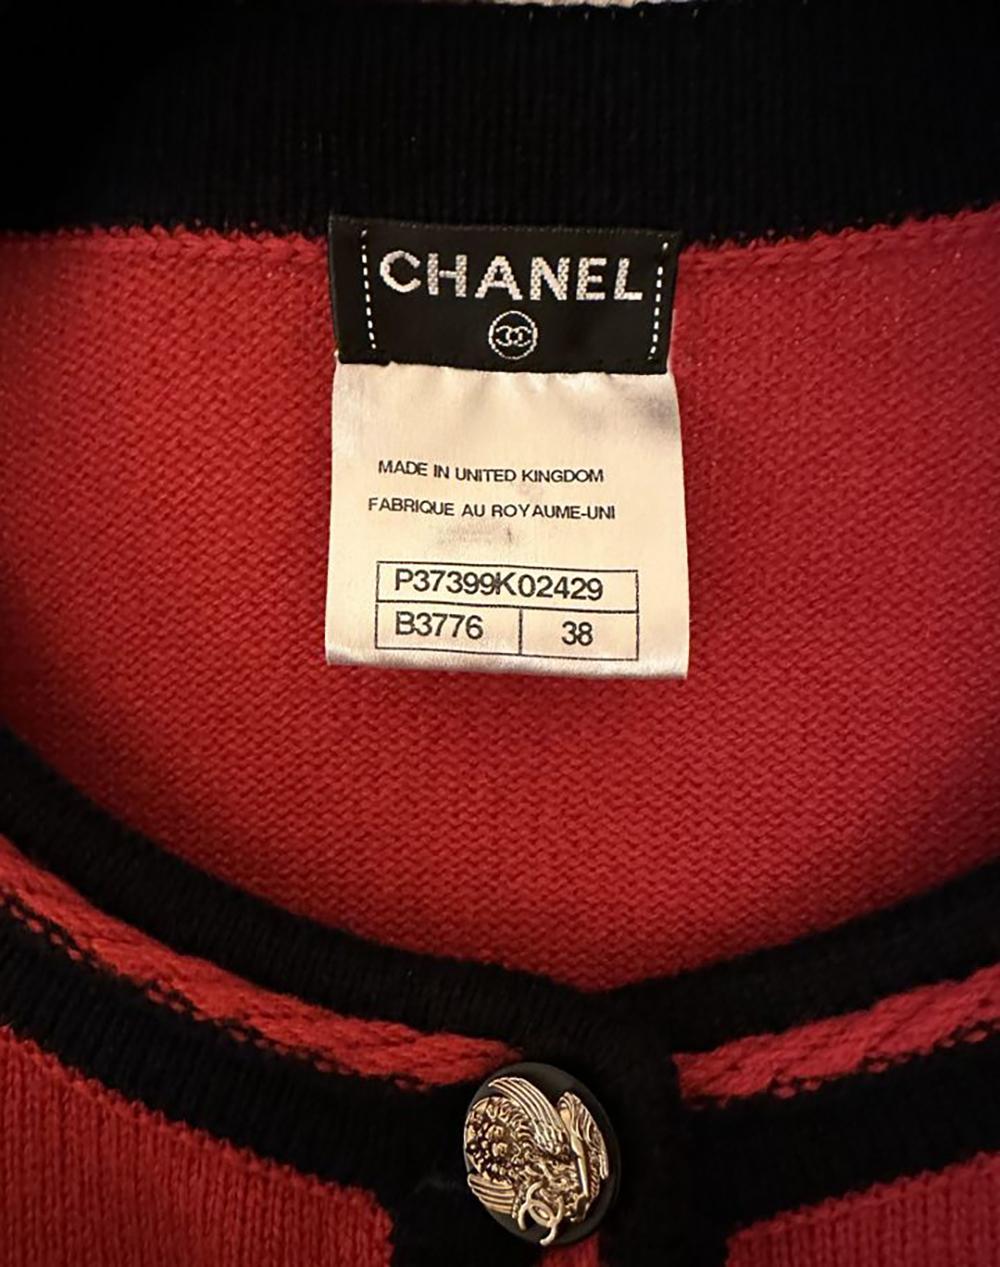 Chanel Kate Moss Style Venice Collection Cardigan  11